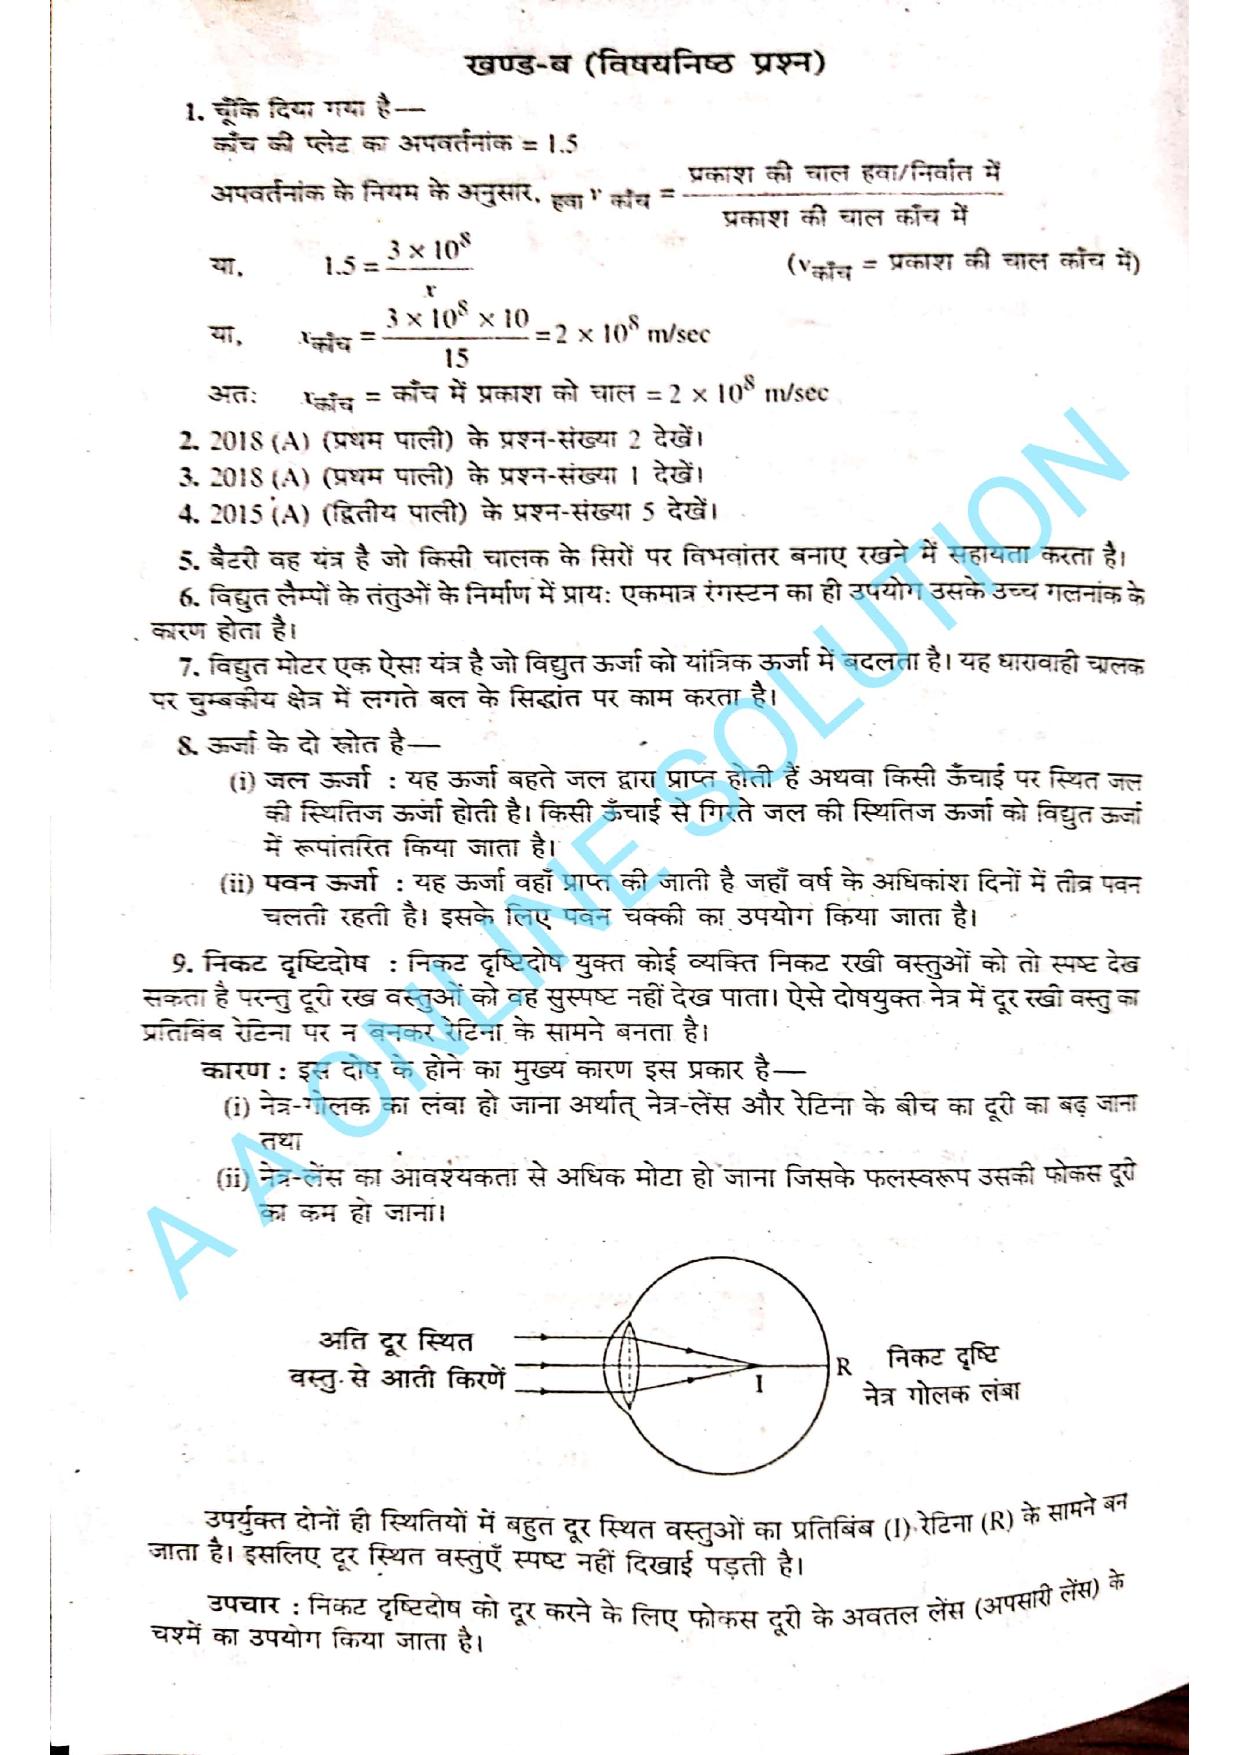 Bihar Board Class 10 Science 2020 (1st Sitting) Question Paper - Page 6